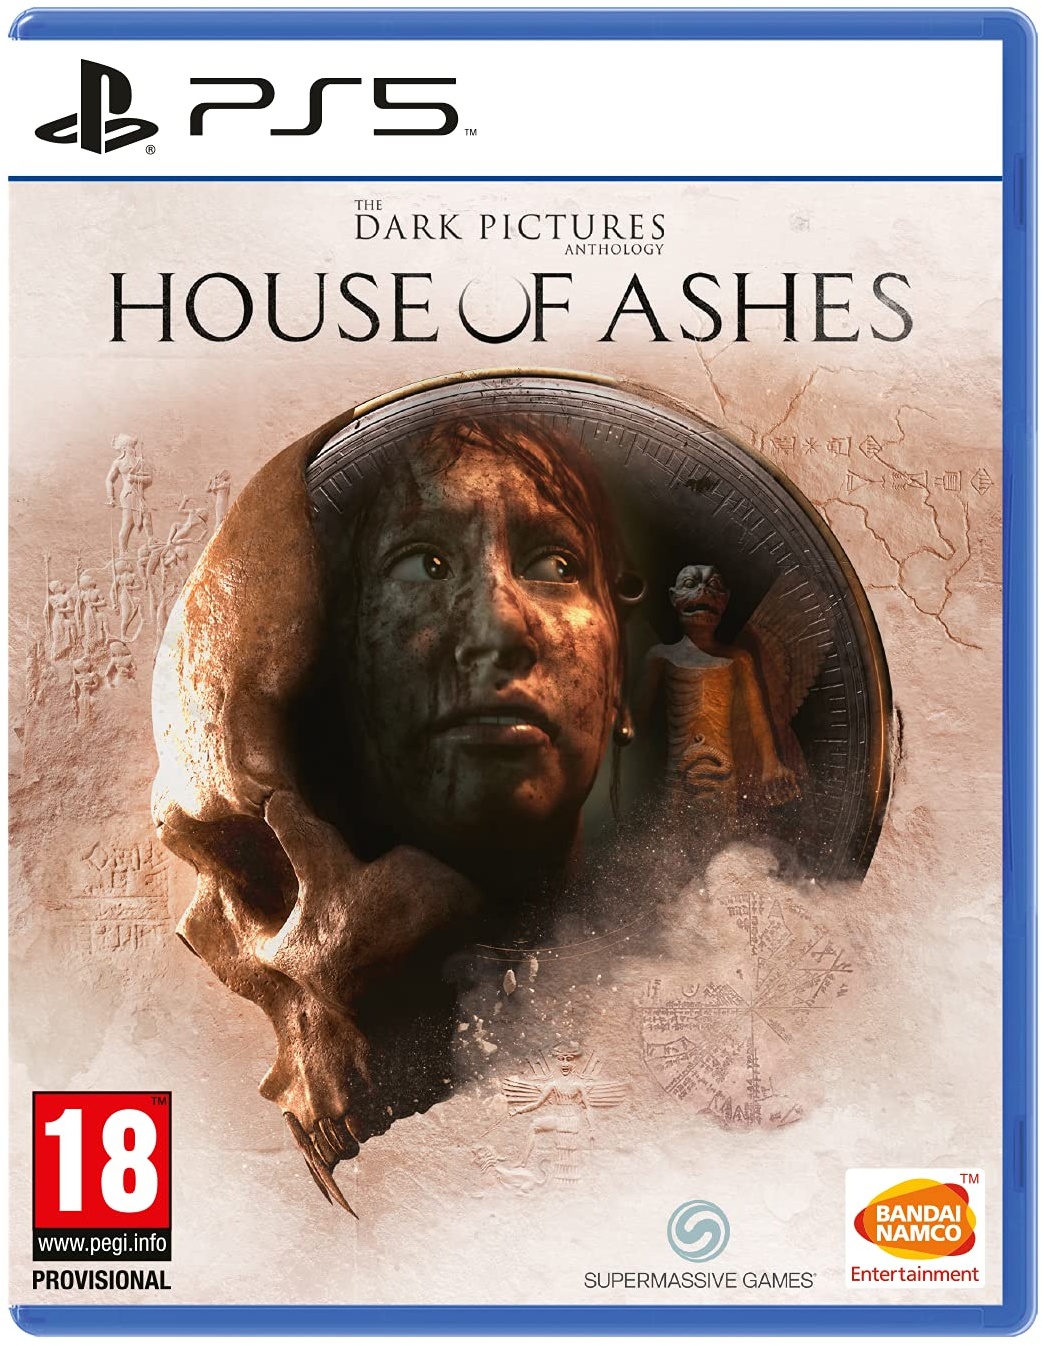 Unbekannt Dark Pictures Anthology: House of Ashes, 199266